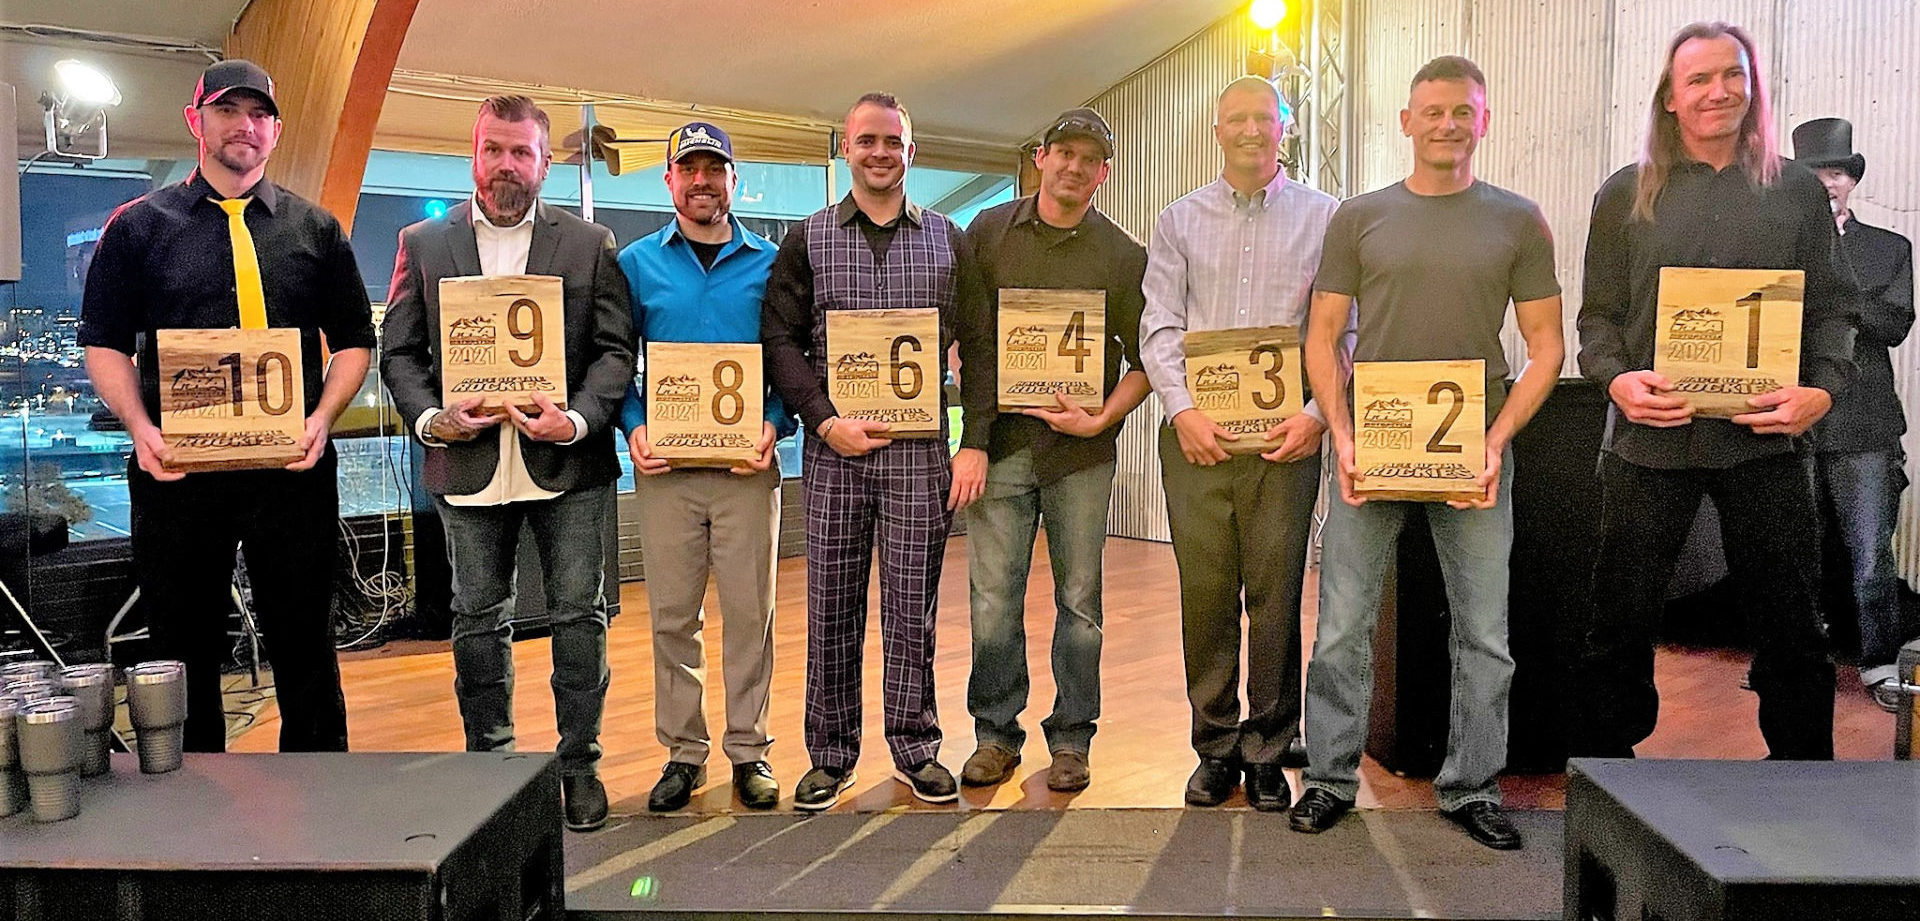 Eight of MRA's 2022 top-10 overall finishers (from left): Scott Morrison, Chris Nami, Dennis Stowers, Jared Dear, Nyles Gourlie, James Wilkerson, Mike Applegate, and Ray Thornton. Photo by Brittany Morrison, courtesy MRA.